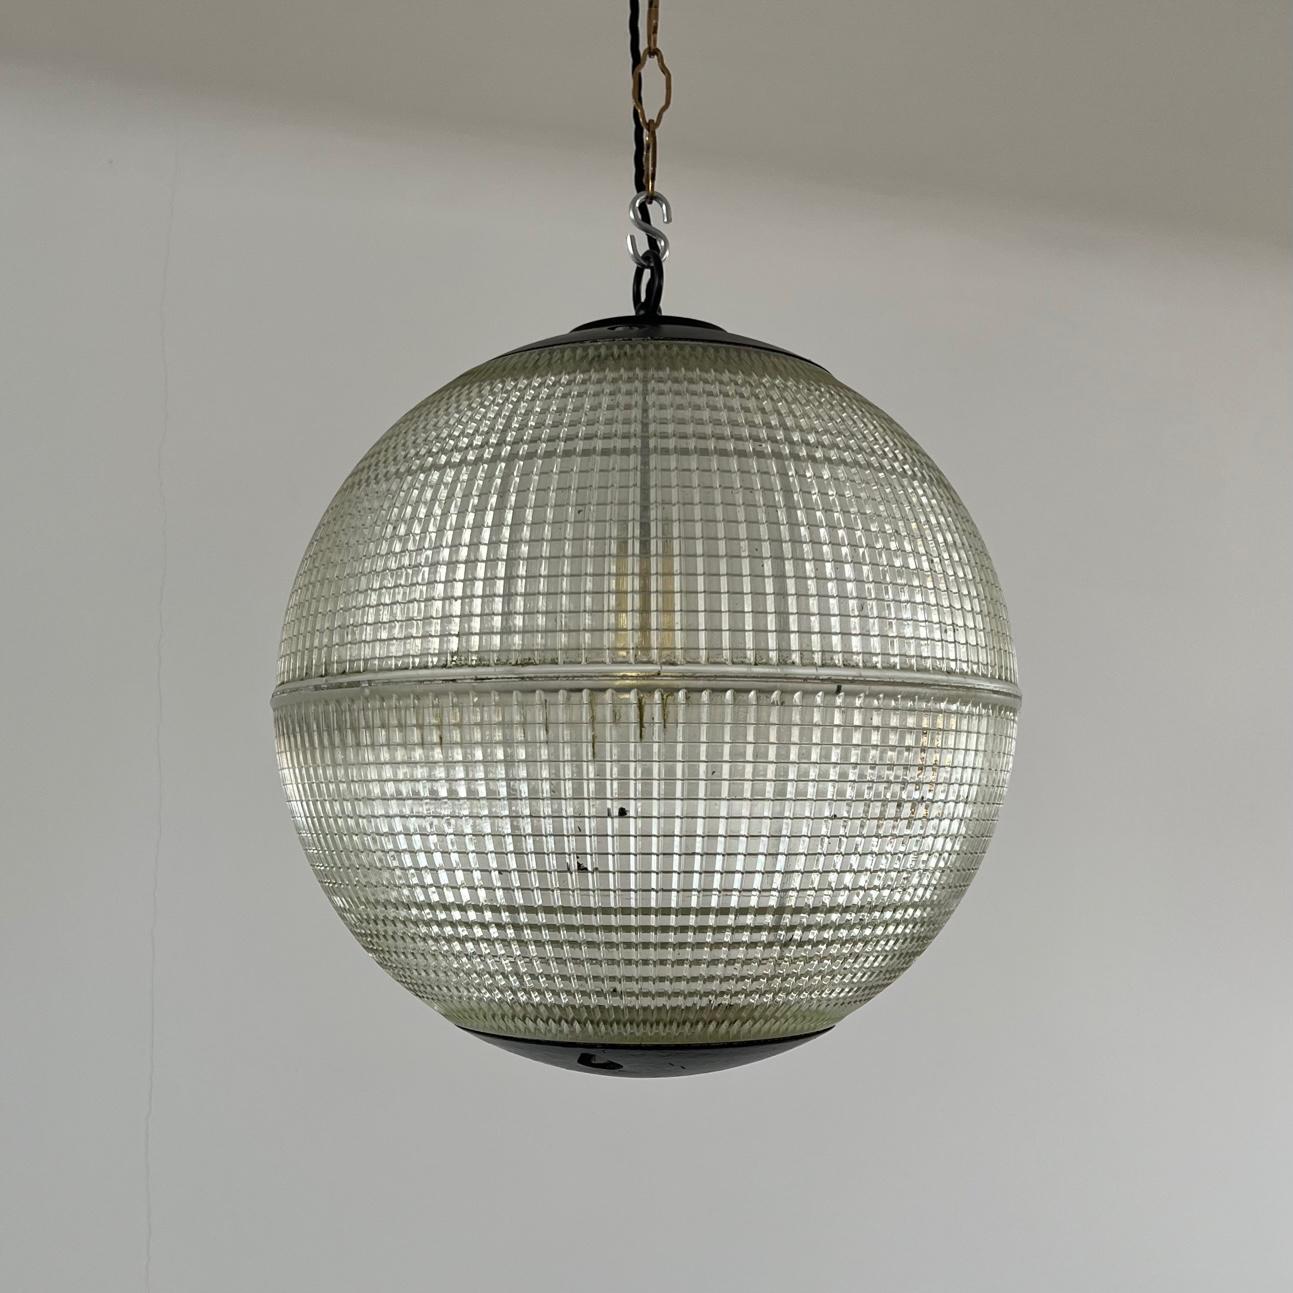 Original mid-century pendant lights. 

40 cm model. 

Paris, France, c1950s. 

Original Parisian street lights, these lights produced by Europhane are formed from thick good quality prismatic glass. 

Since adapted and re-wired. 

No chain